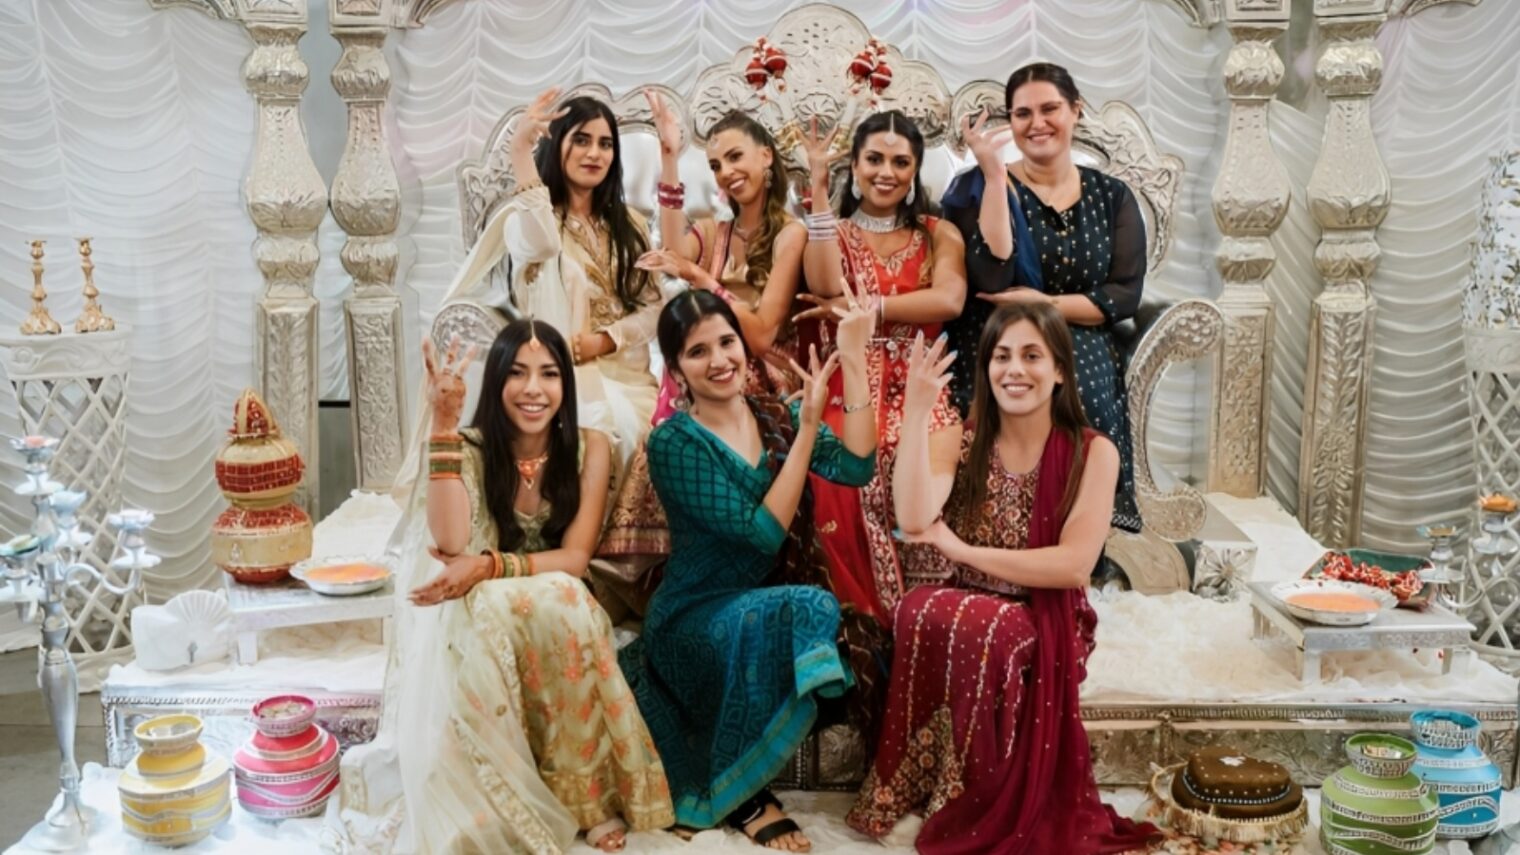 Revital Moses (in green) at her cousinâ€™s Israeli Indian wedding. Photo by Sabres Photography